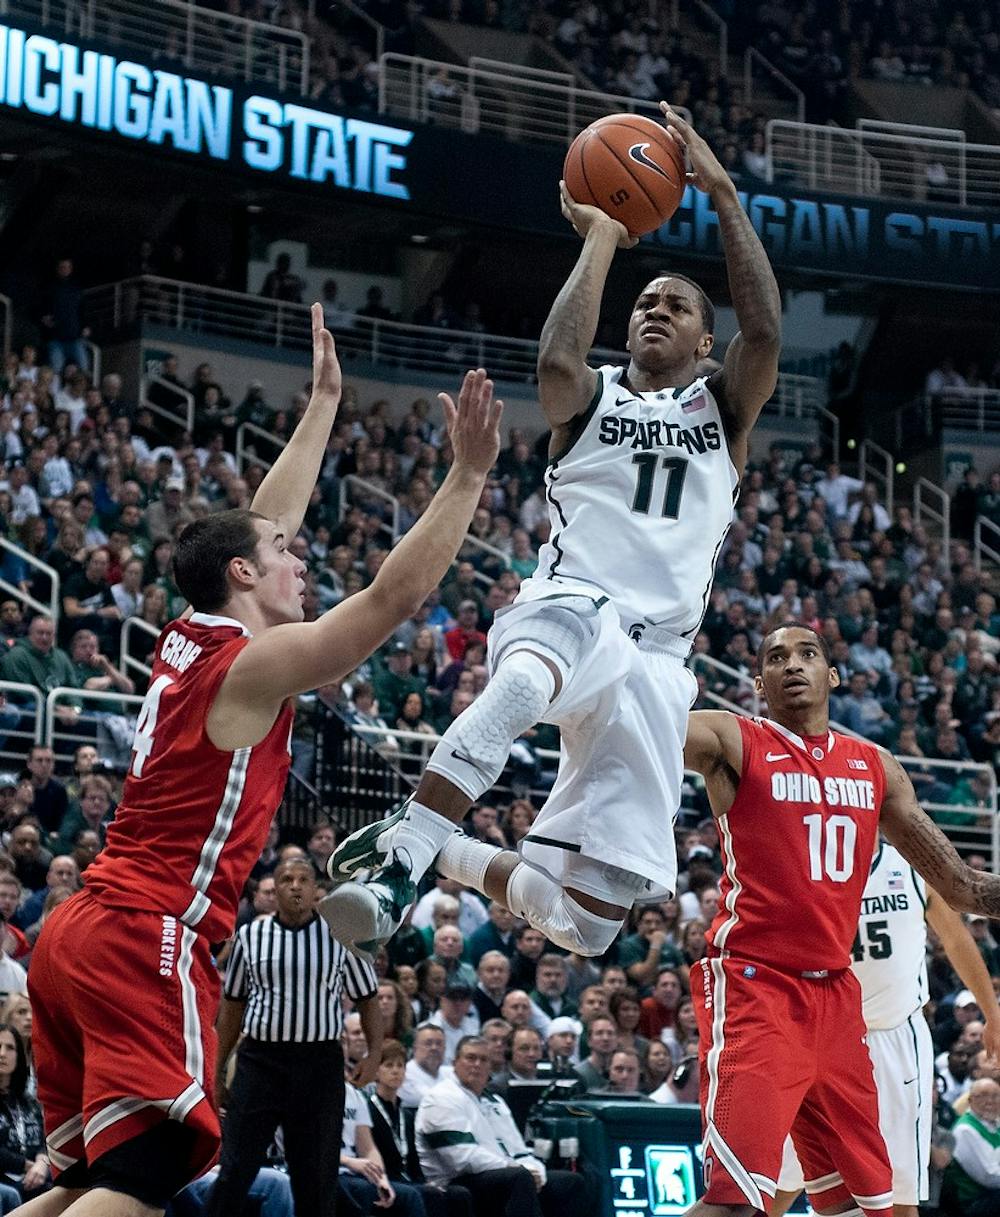 	<p>Junior guard Keith Appling takes a jump shot against Ohio State on Saturday, Jan. 19, 2013 at Breslin Center.  Appling scored 15 points in the game. Katie Stiefel/The State News</p>